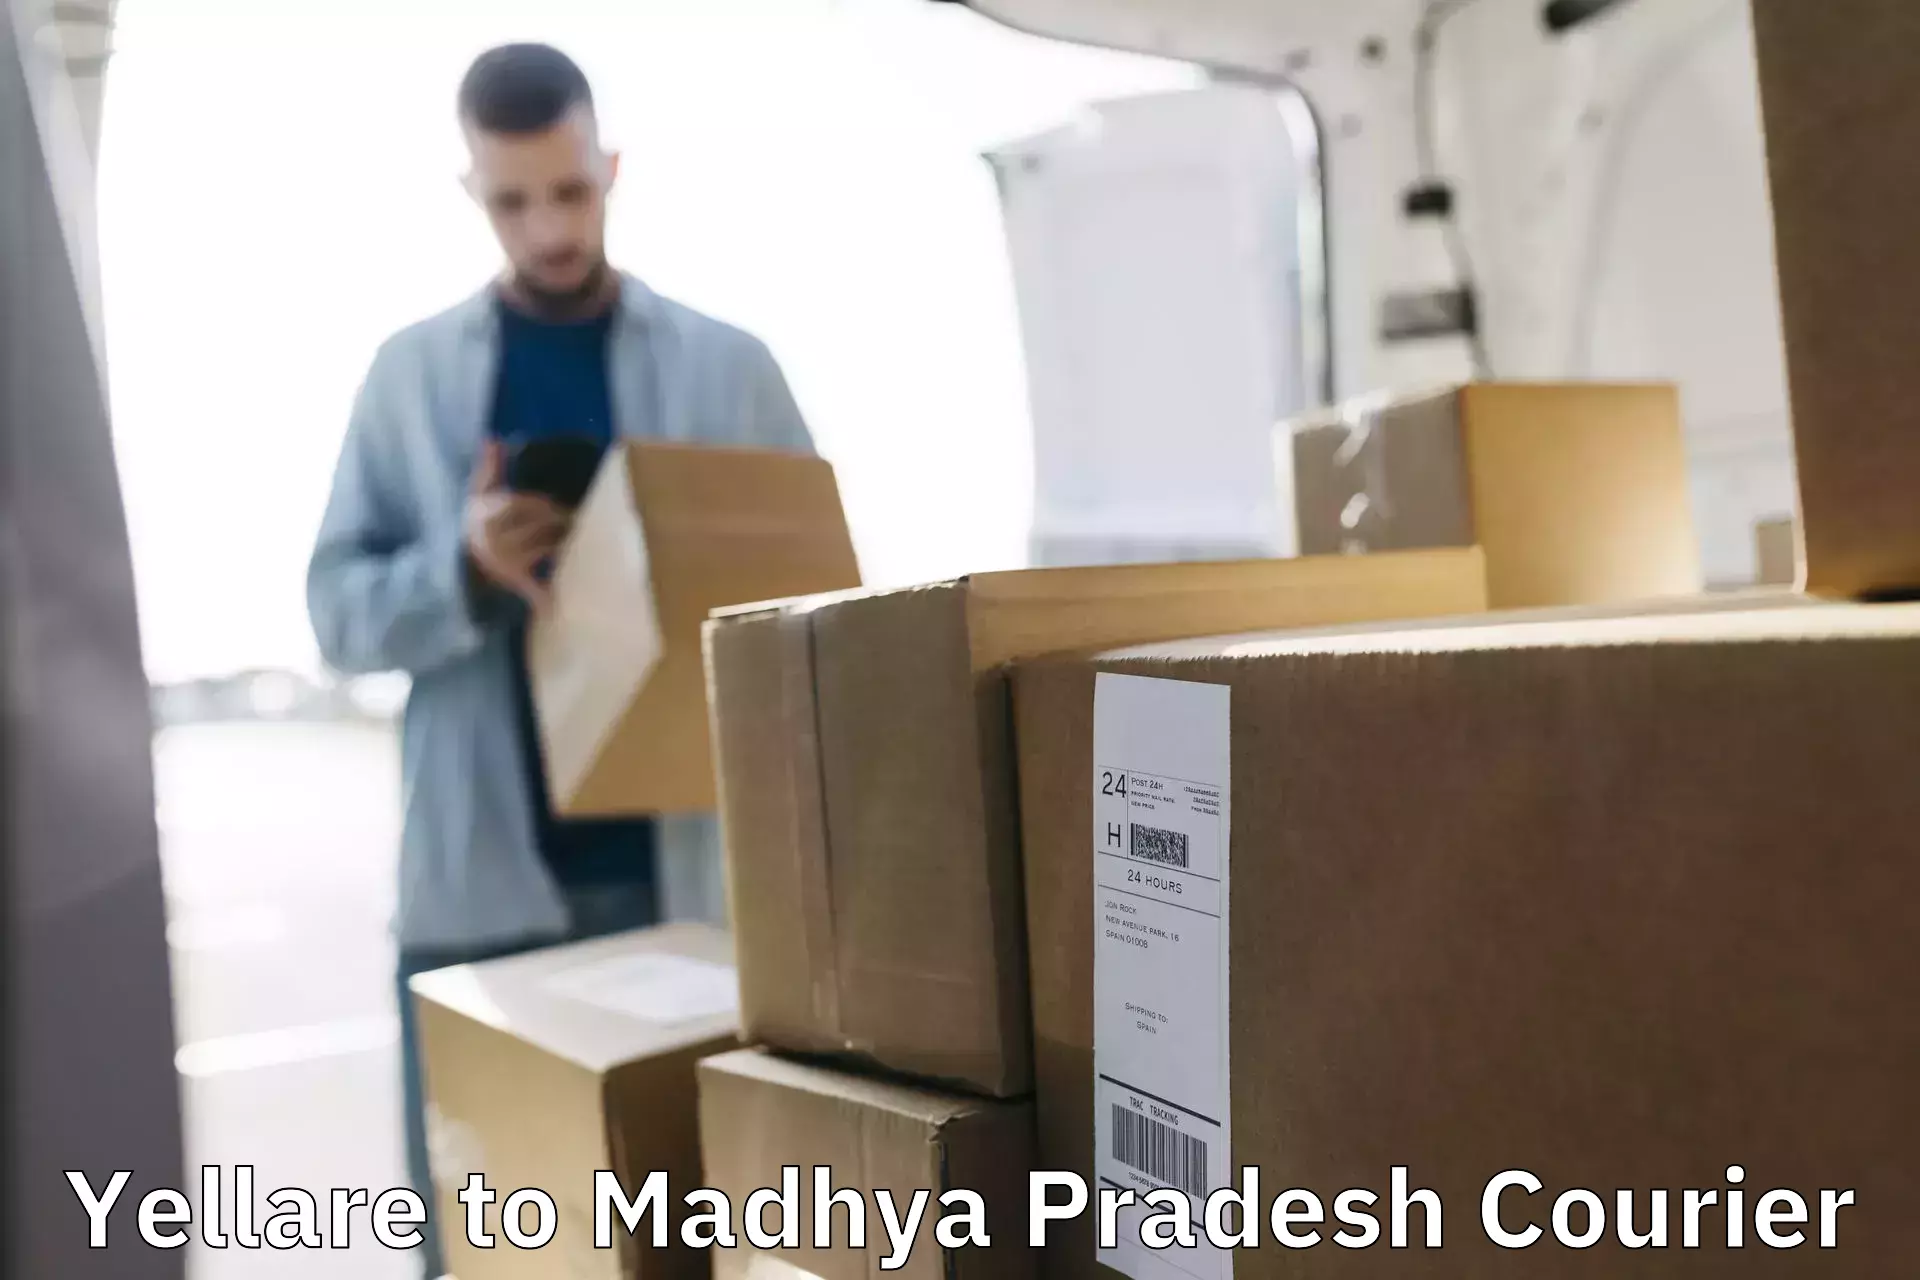 Rapid shipping services Yellare to Satna